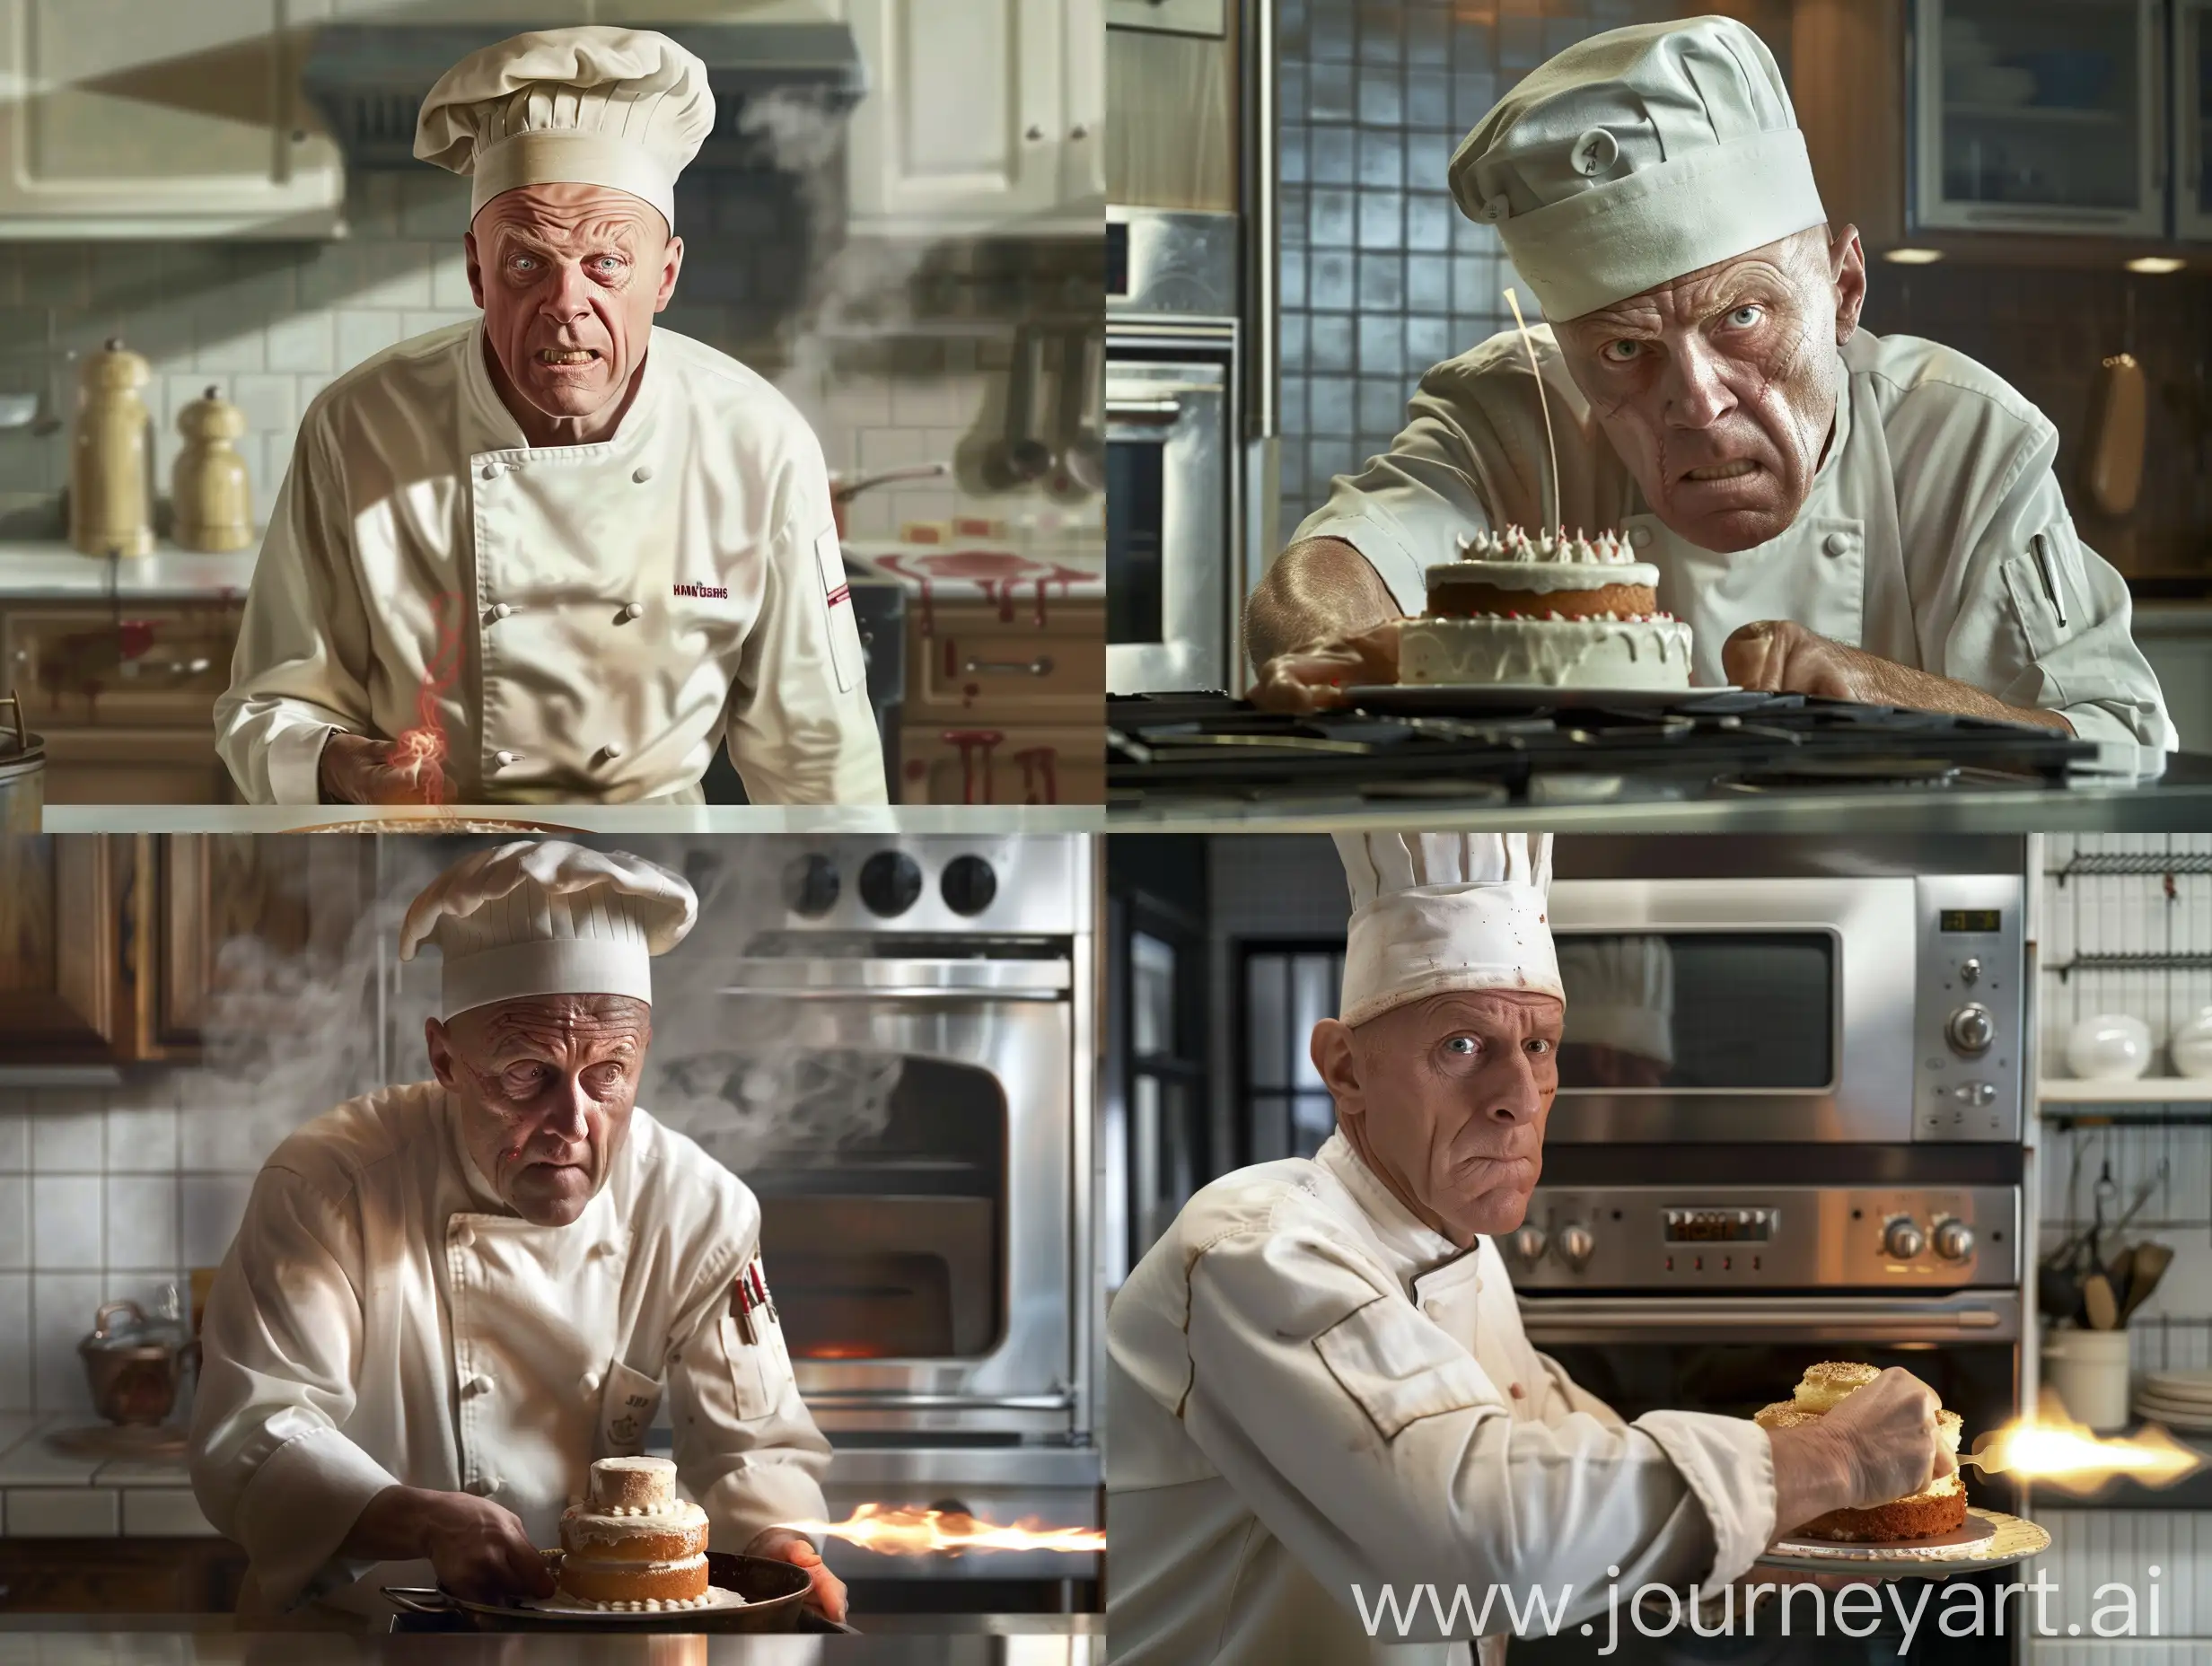 Hank Schrader (played by Dean Norris) is bad in Breaking Bad, Hank Schrader is trying to put the cake in the oven but Hank Schrader's cooking hat is firing. Hank Schrader's off-white chef's uniform. Hank Schrader's face is scary, kitchen background, clear, modern lighting, realistic, q2


